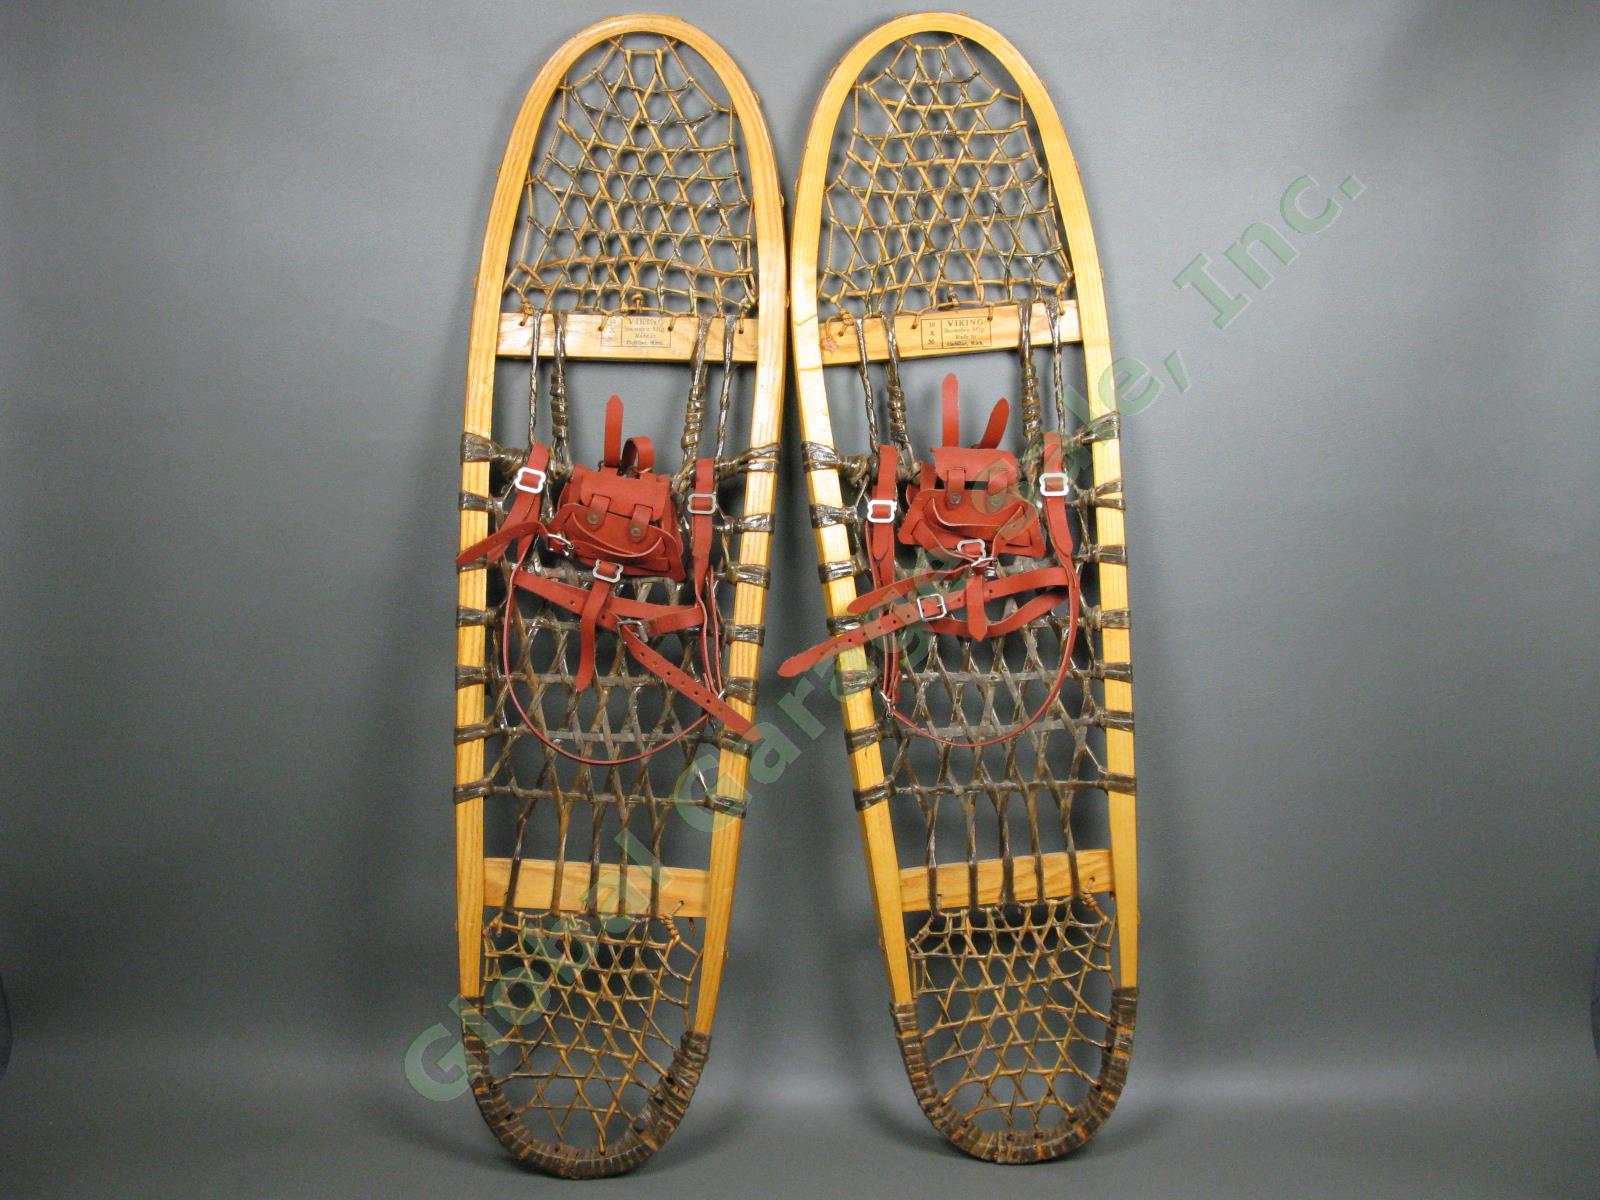 Vintage Viking Wooden Snowshoes 10"x36" Cadillac Michigan Cabin Decor MINT COND